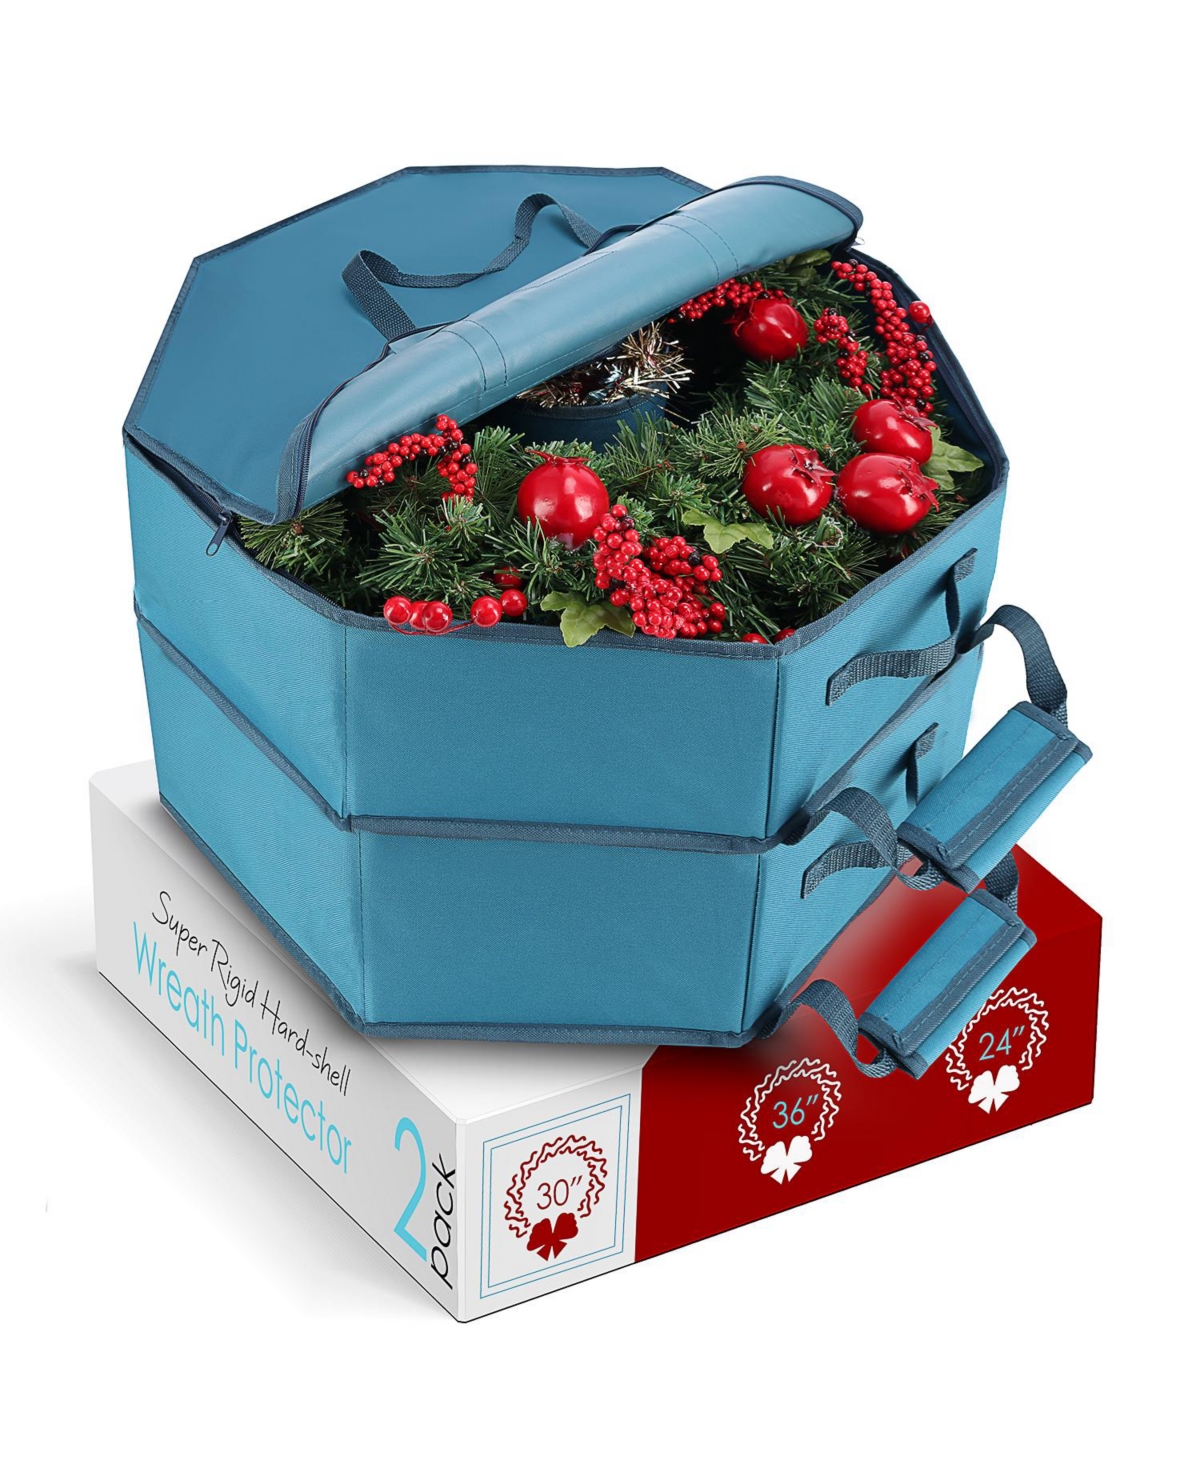 Premium Hard Shell Wreath Storage Bag with Interior Pockets, Dual Zipper and Handles - 30 Inch - 2 Pack - Blue